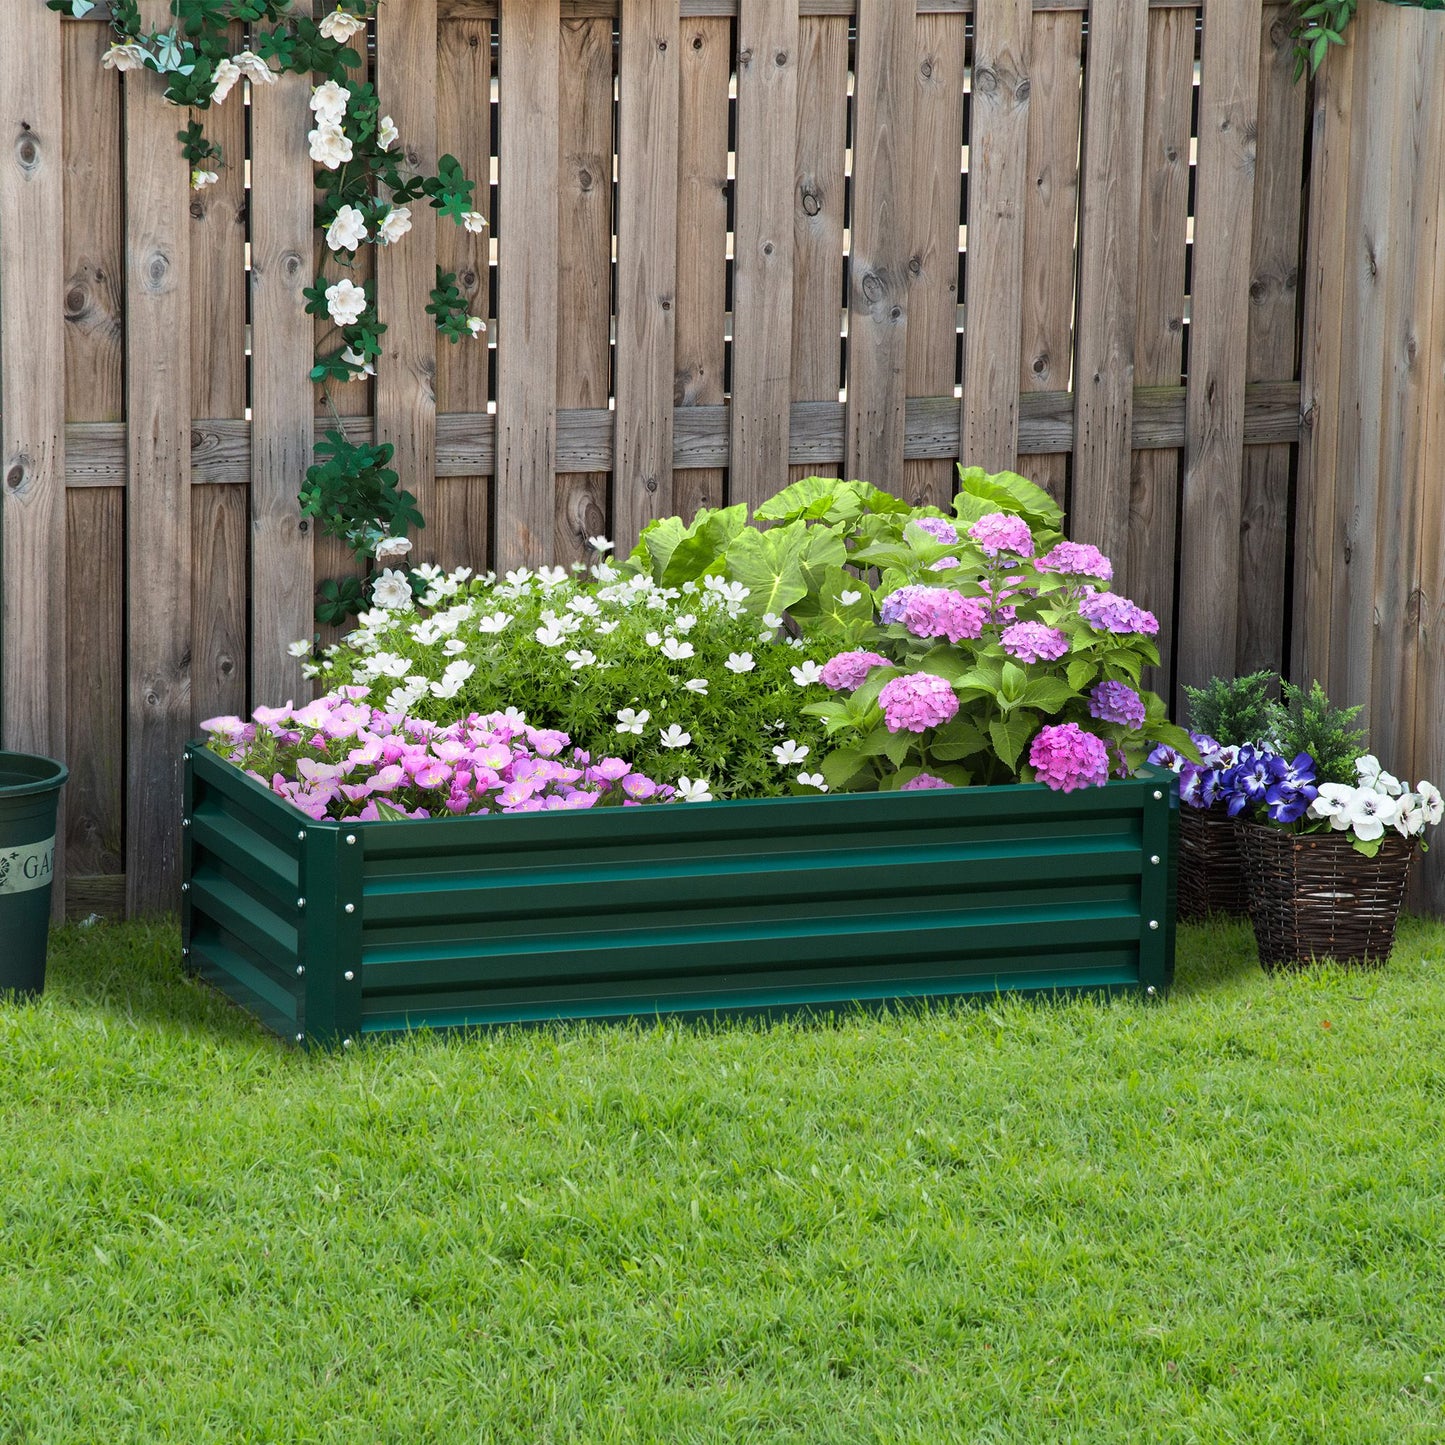 Outsunny Raised Beds for Garden, Galvanized Outdoor Planters, for Herbs and Vegetables, Use for Patio, Backyard, Balcony, Green